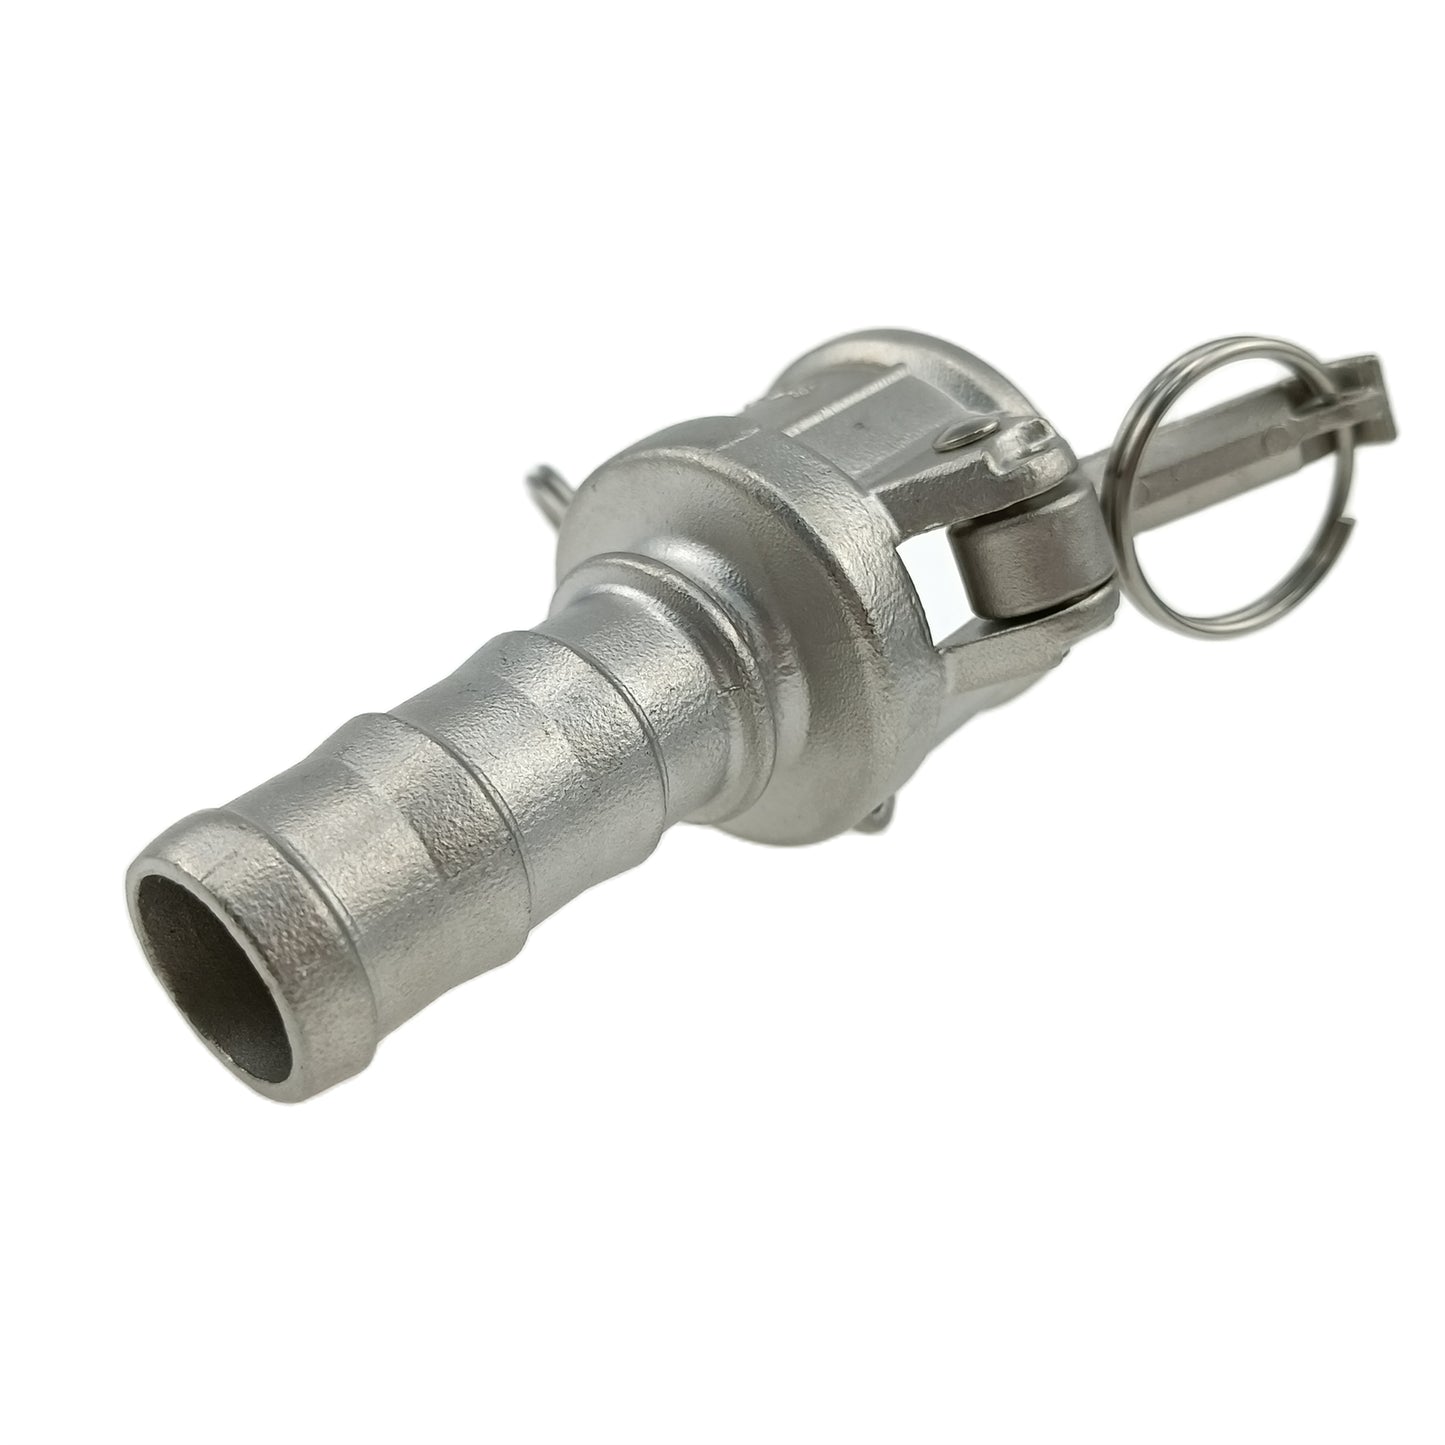 Stainless Steel 304 Cam & Groove Adapter Part C Female Coupling x Hose Shank with Buna-N Seal and Safety Drills